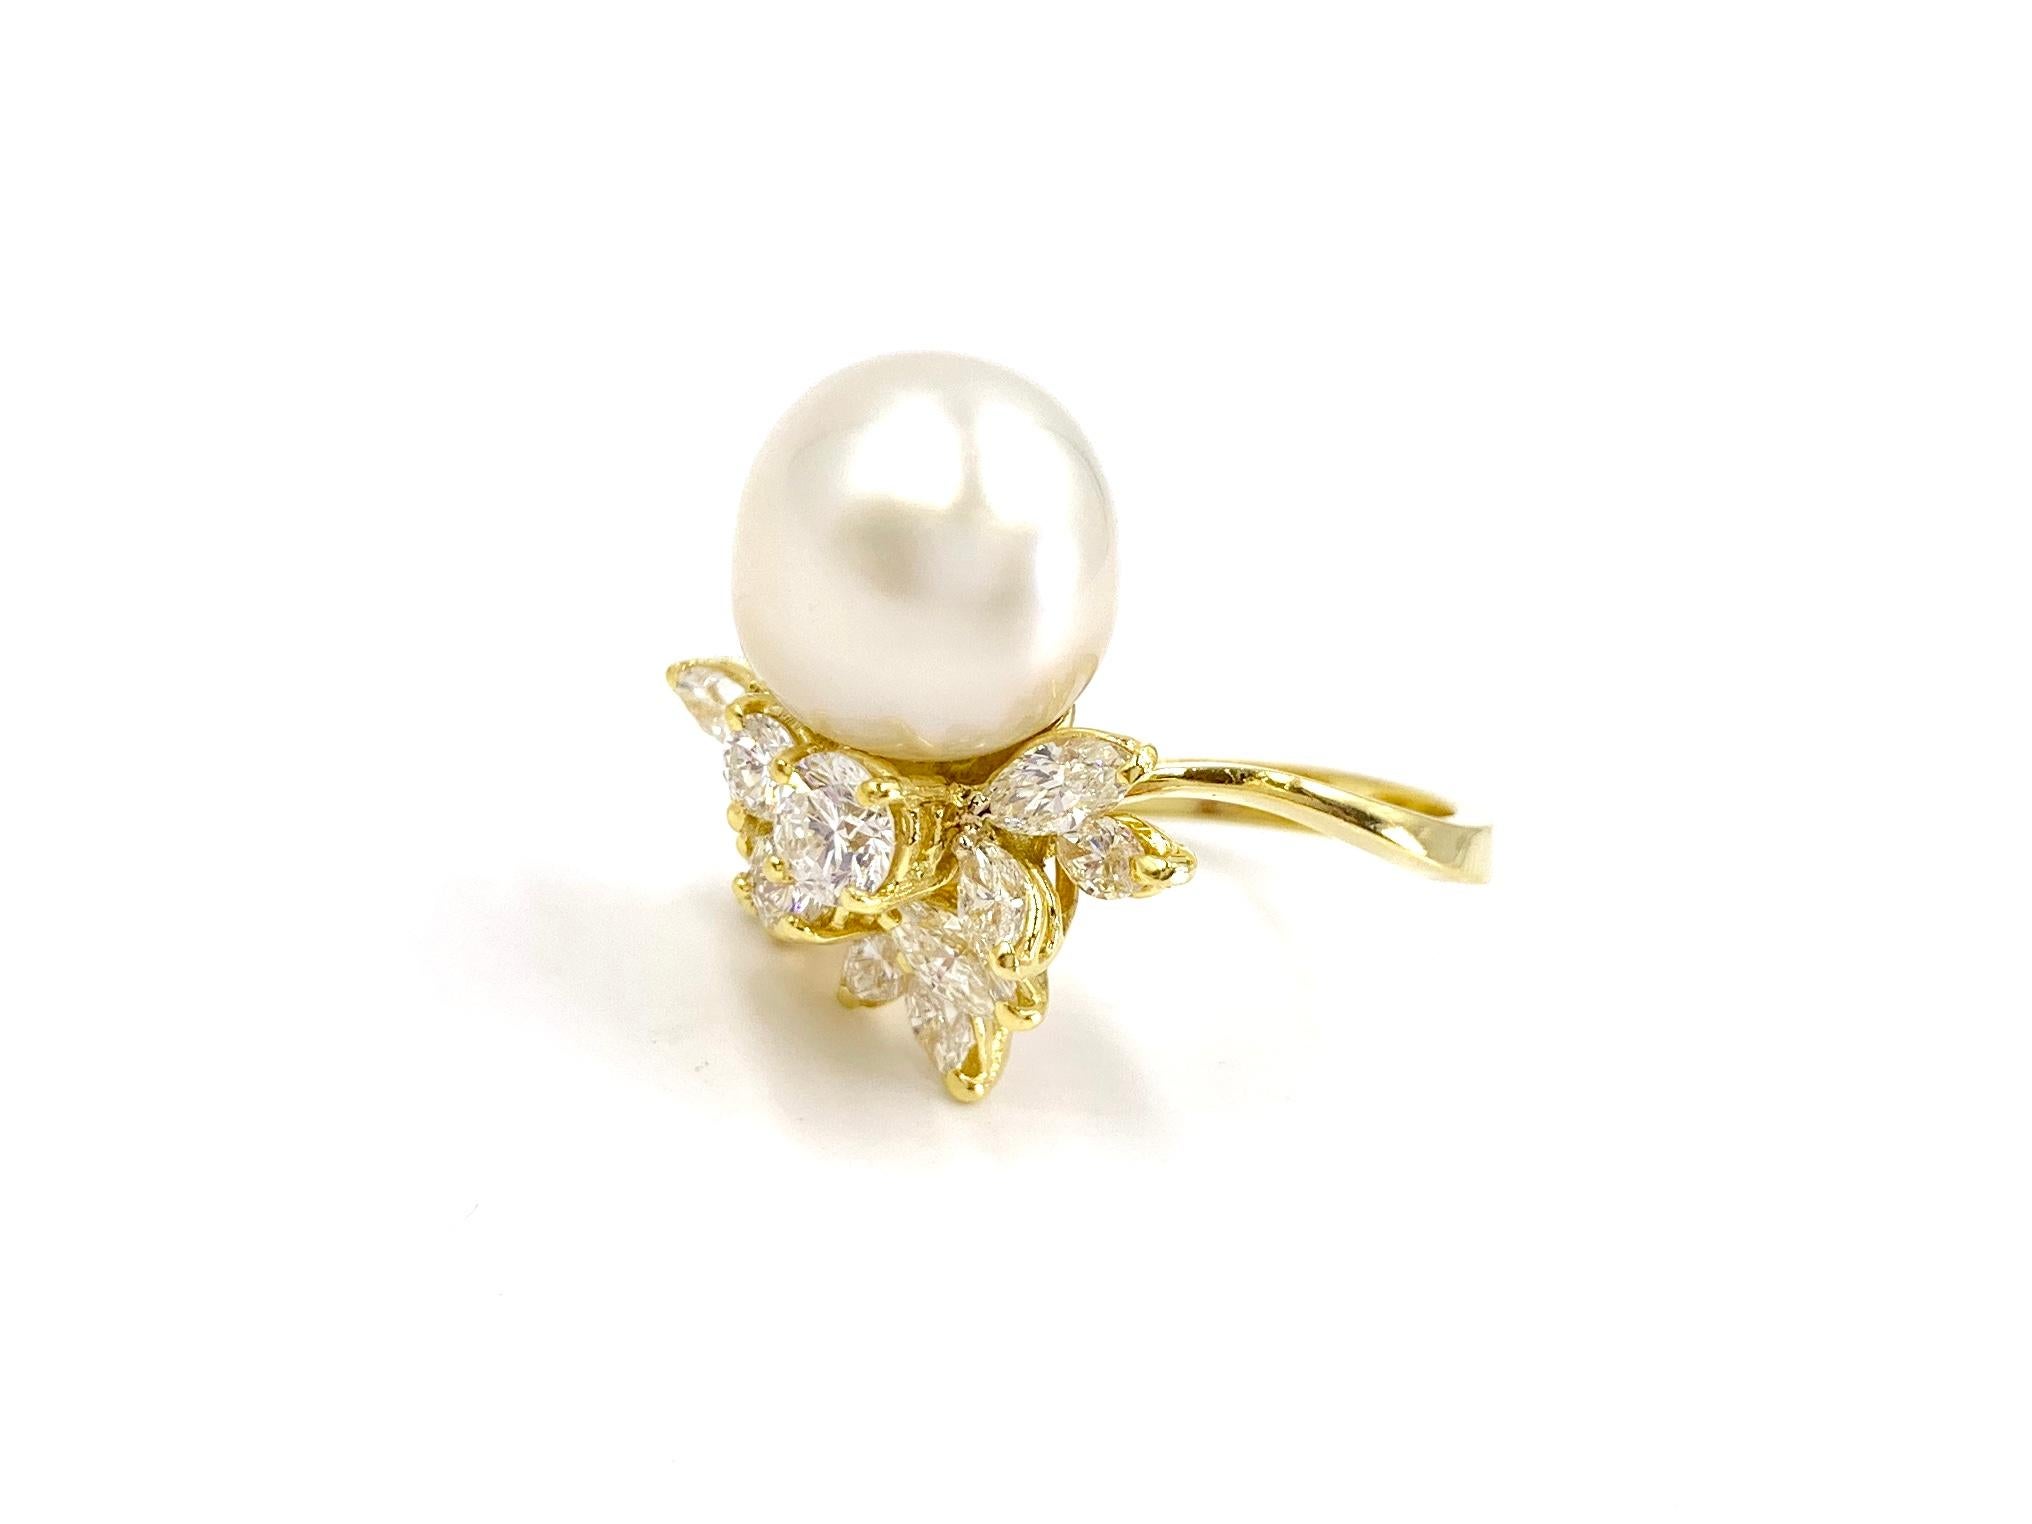 18 Karat Diamond and South Sea Pearl Cocktail Ring In Excellent Condition For Sale In Pikesville, MD